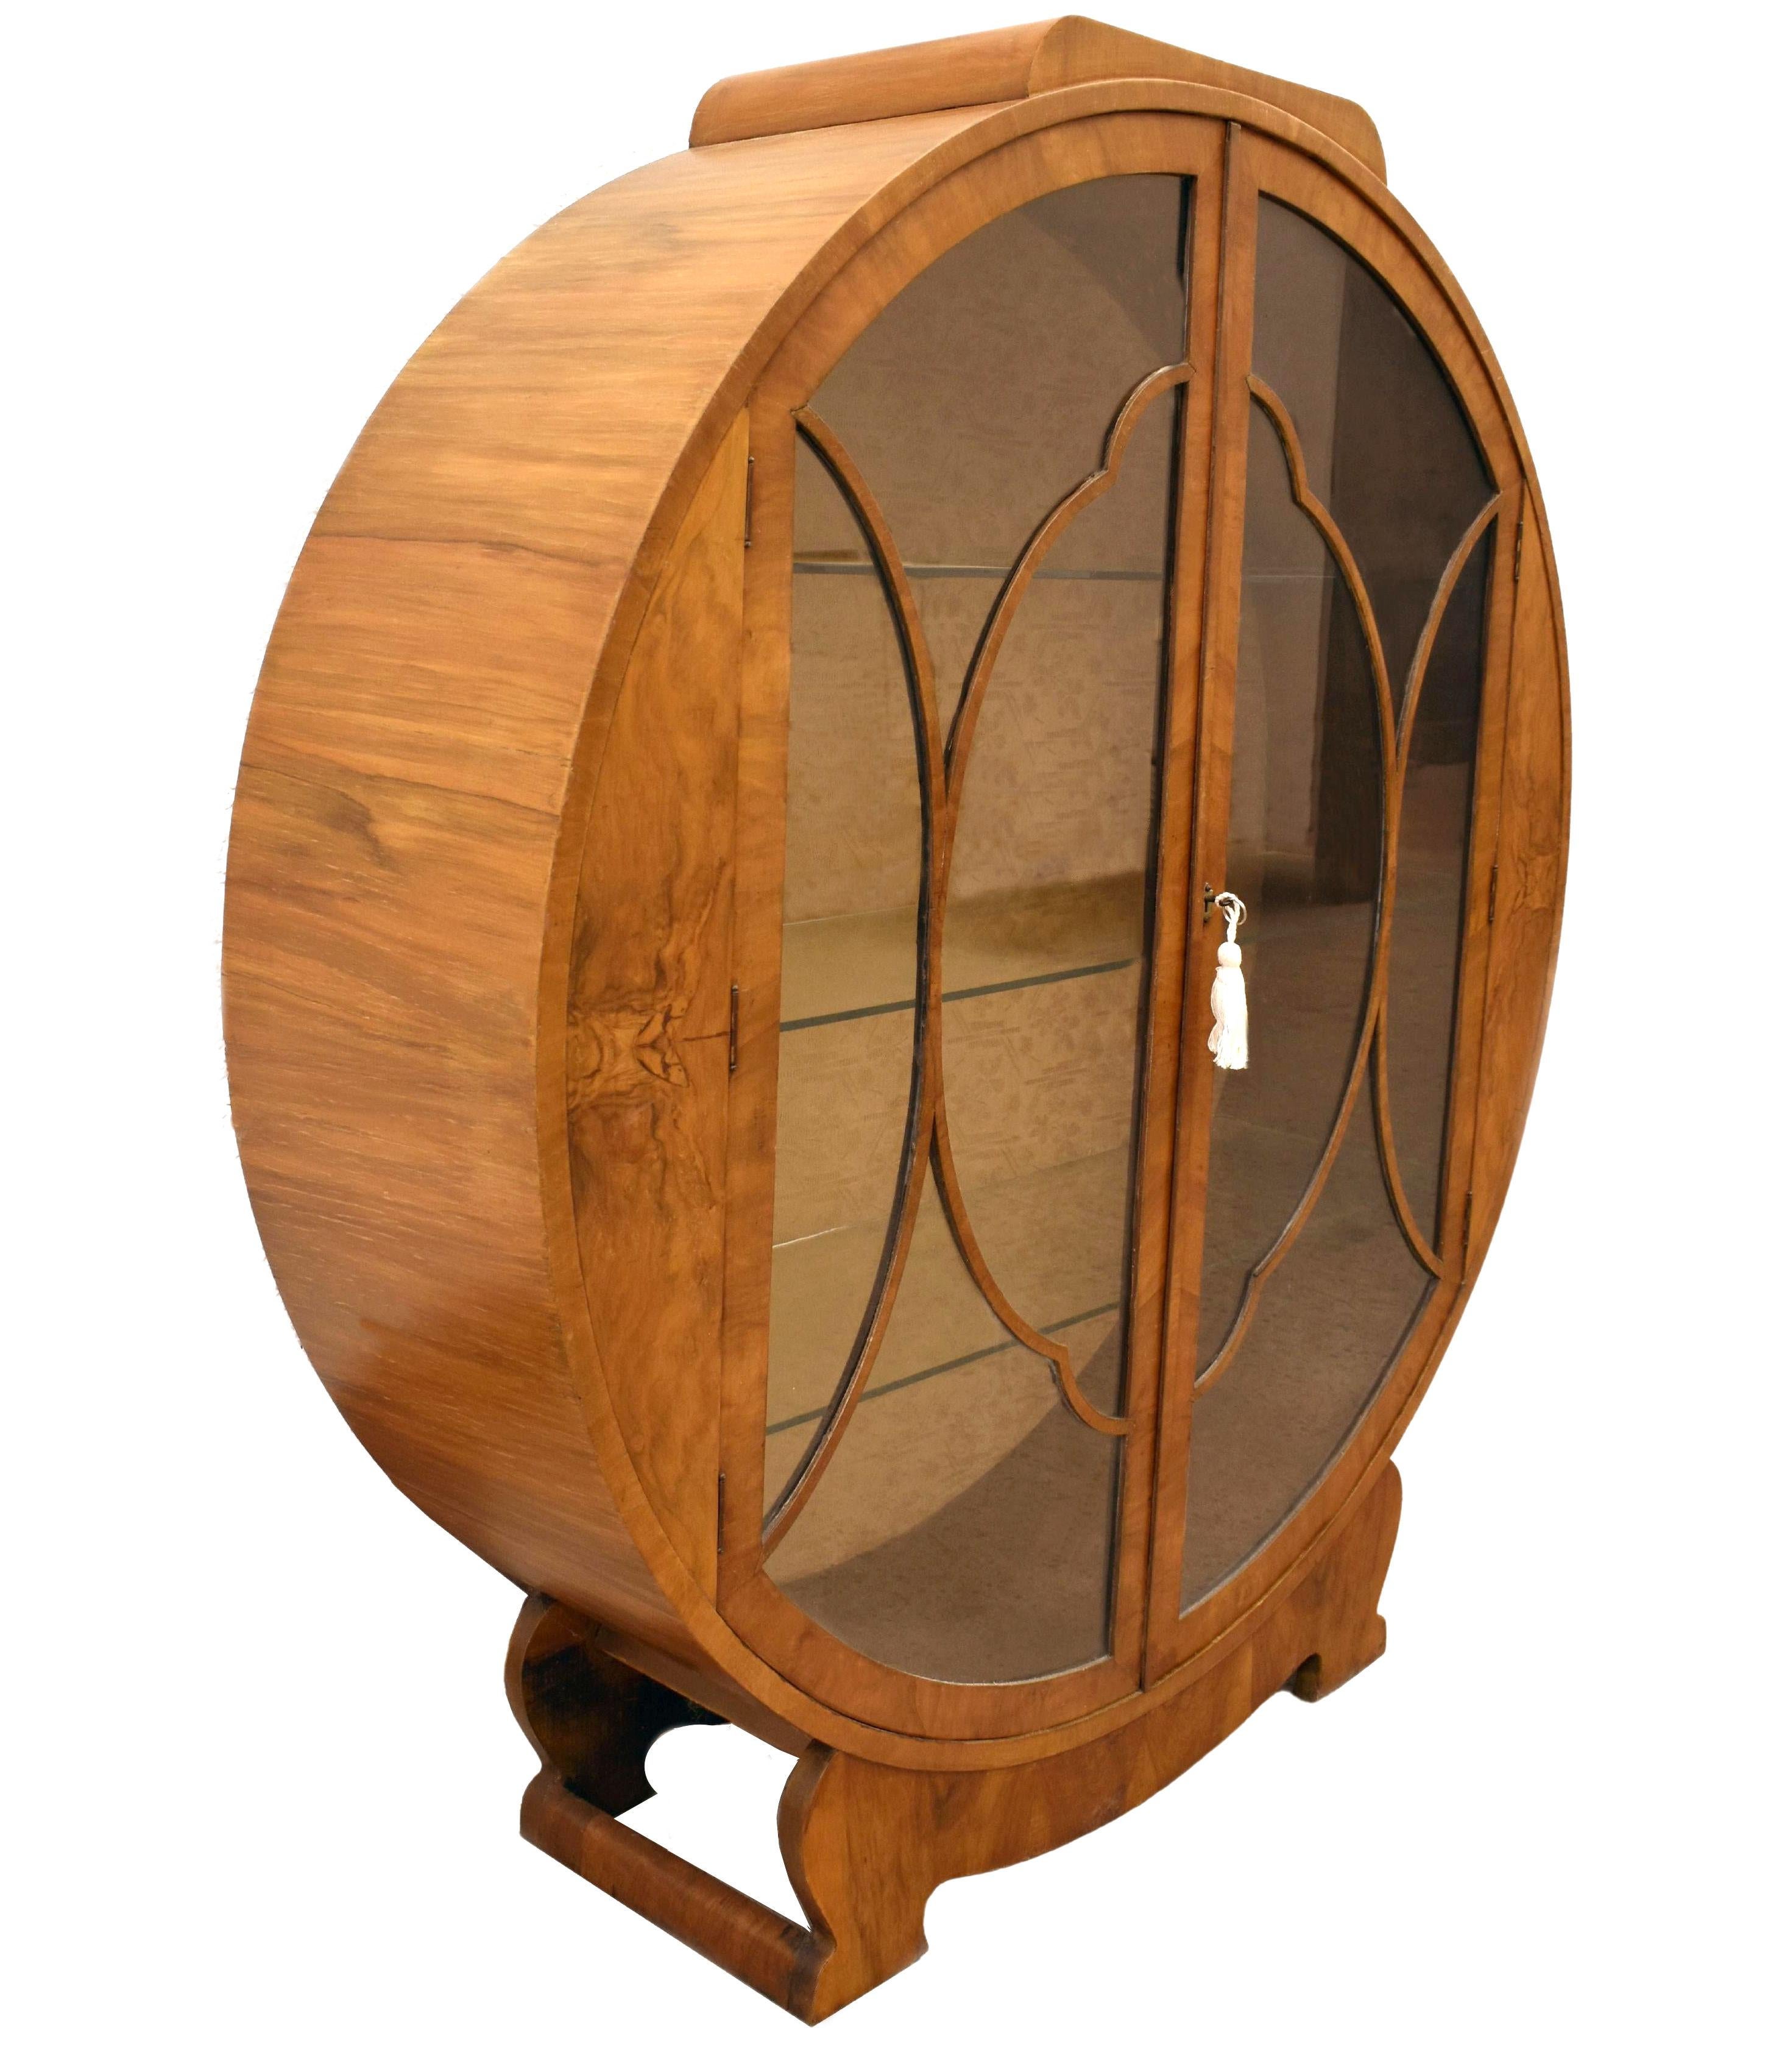 Fabulous, original 1930s Art Deco display cabinet. This lovely figured walnut veneered honey mid-tone walnut. The cabinet features a generously sized interior display area for your 'collections'. Very attractive cloud shape astragal to the glass to